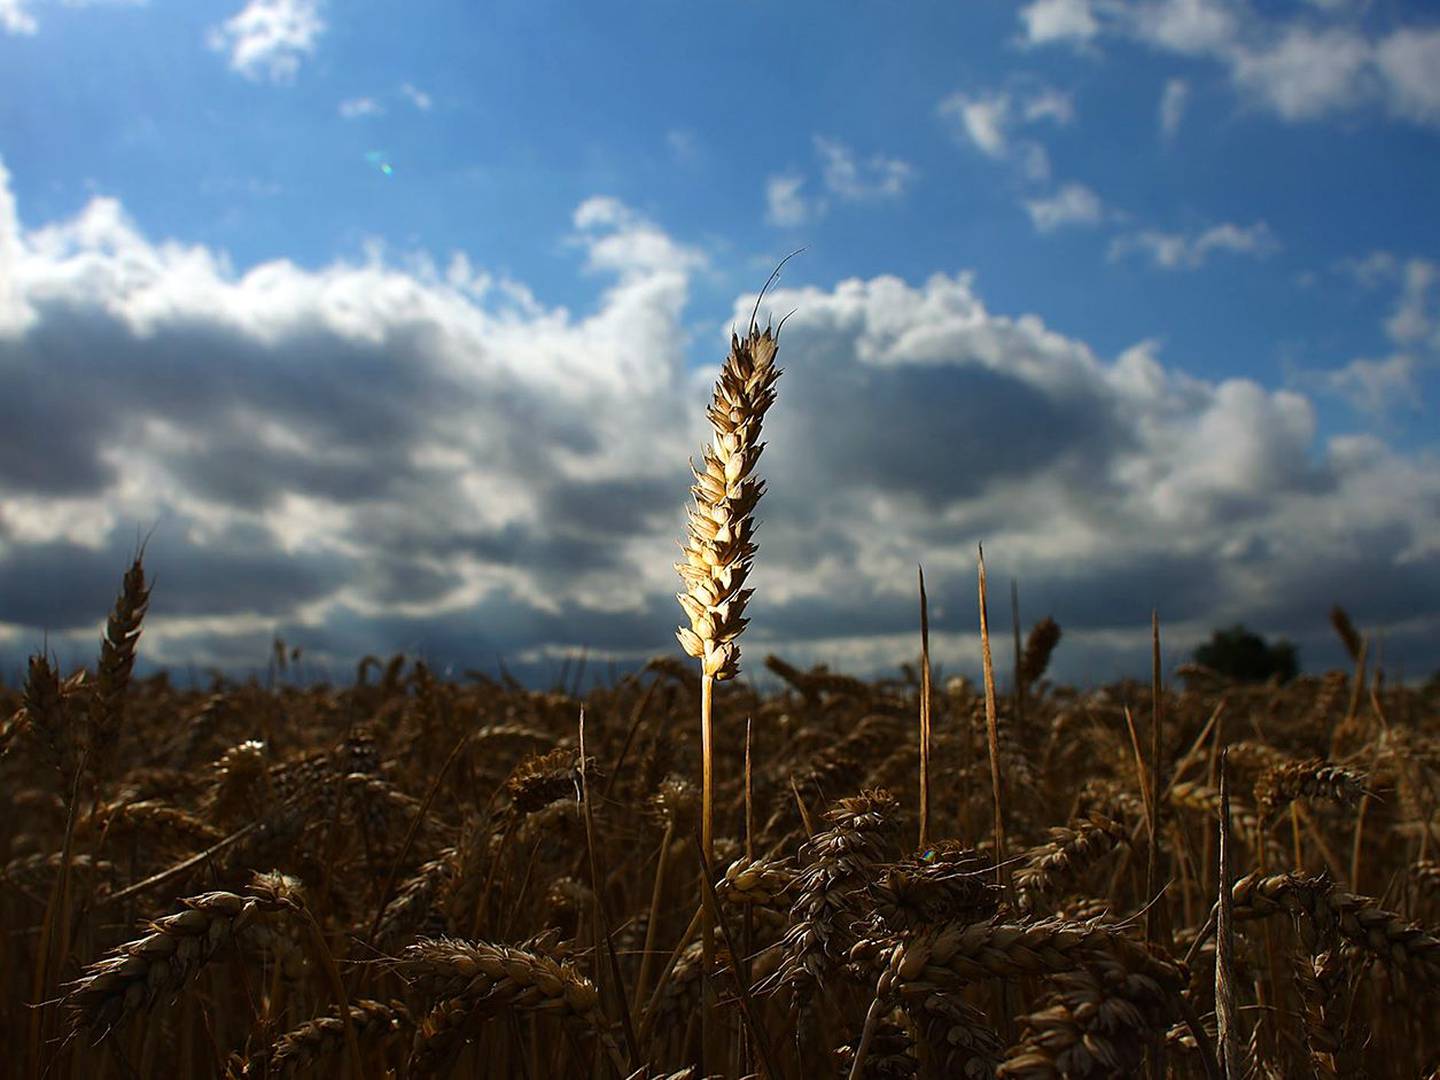 Ripe wheat waits to be harvested.